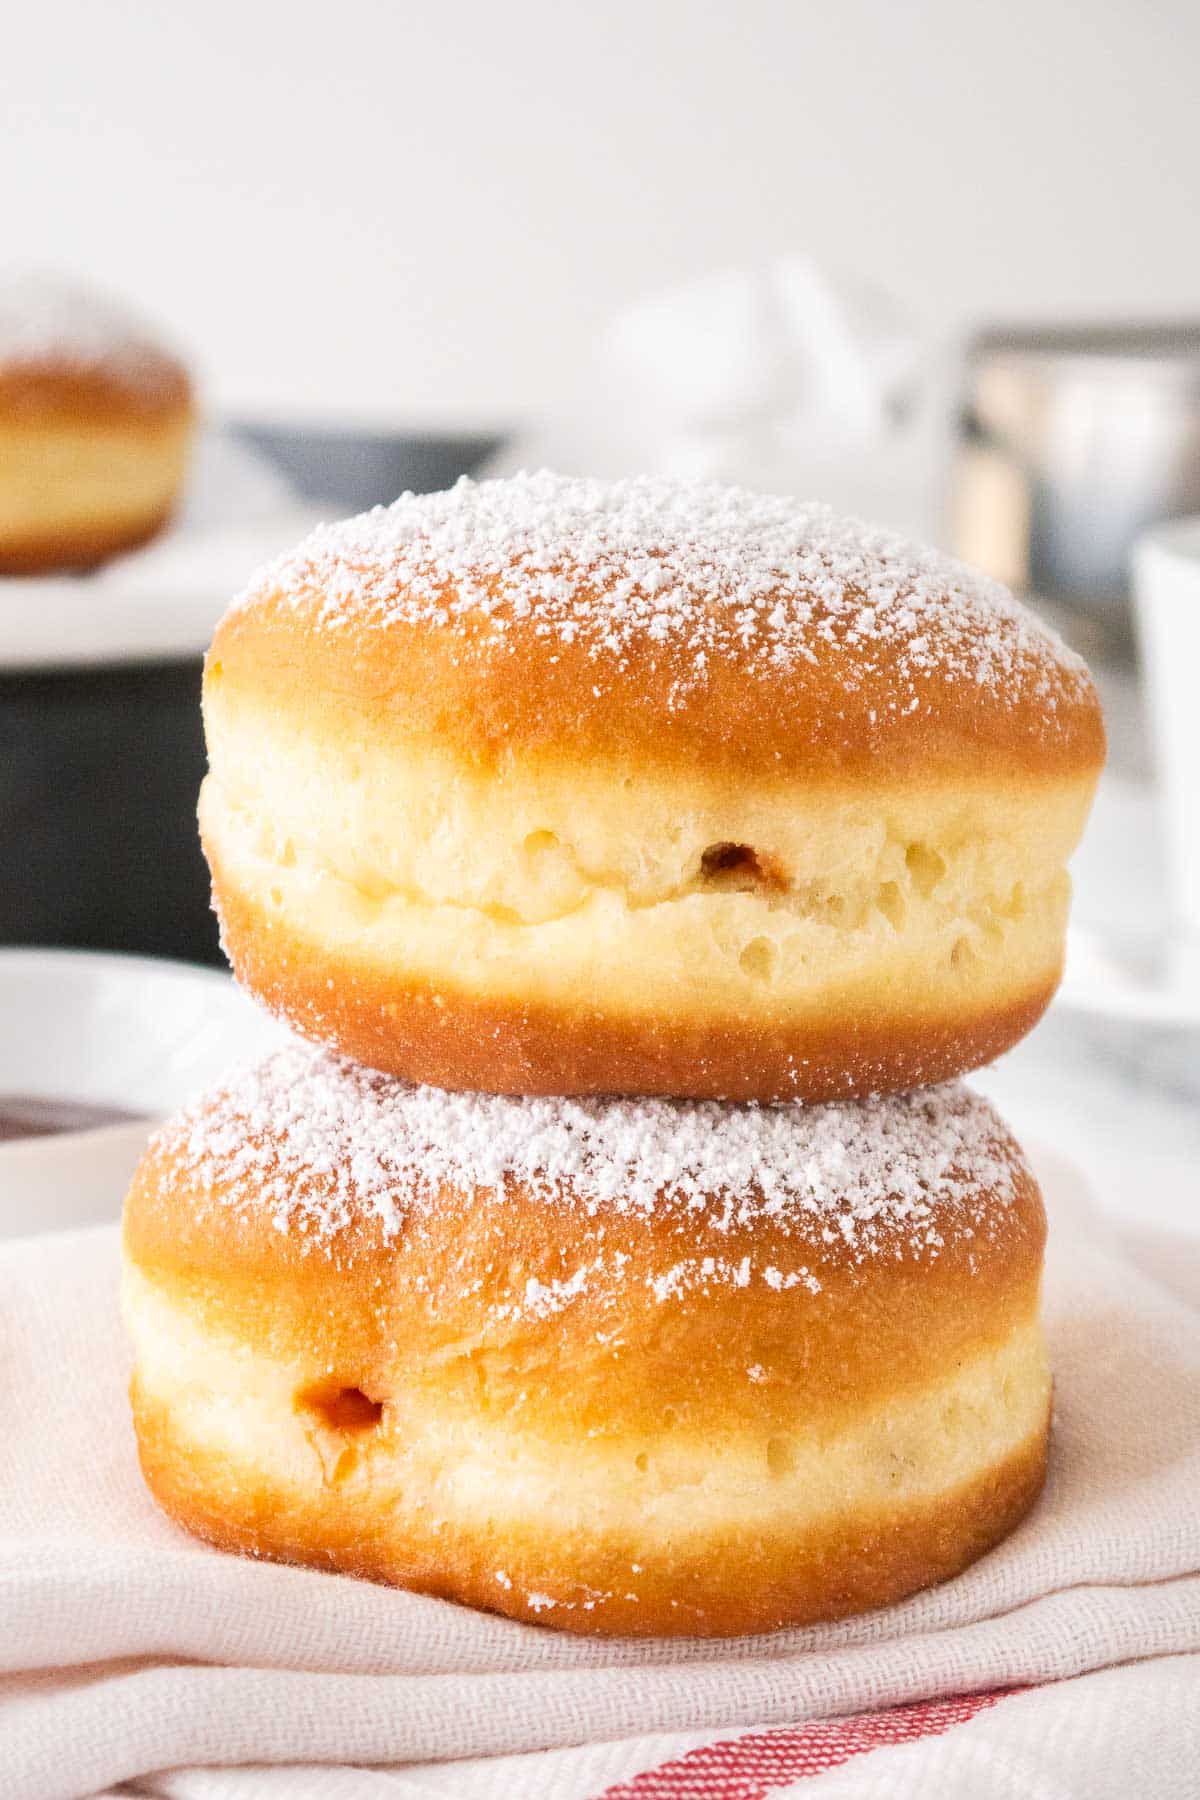 Two Krapfen stacked on a kitchen towel.